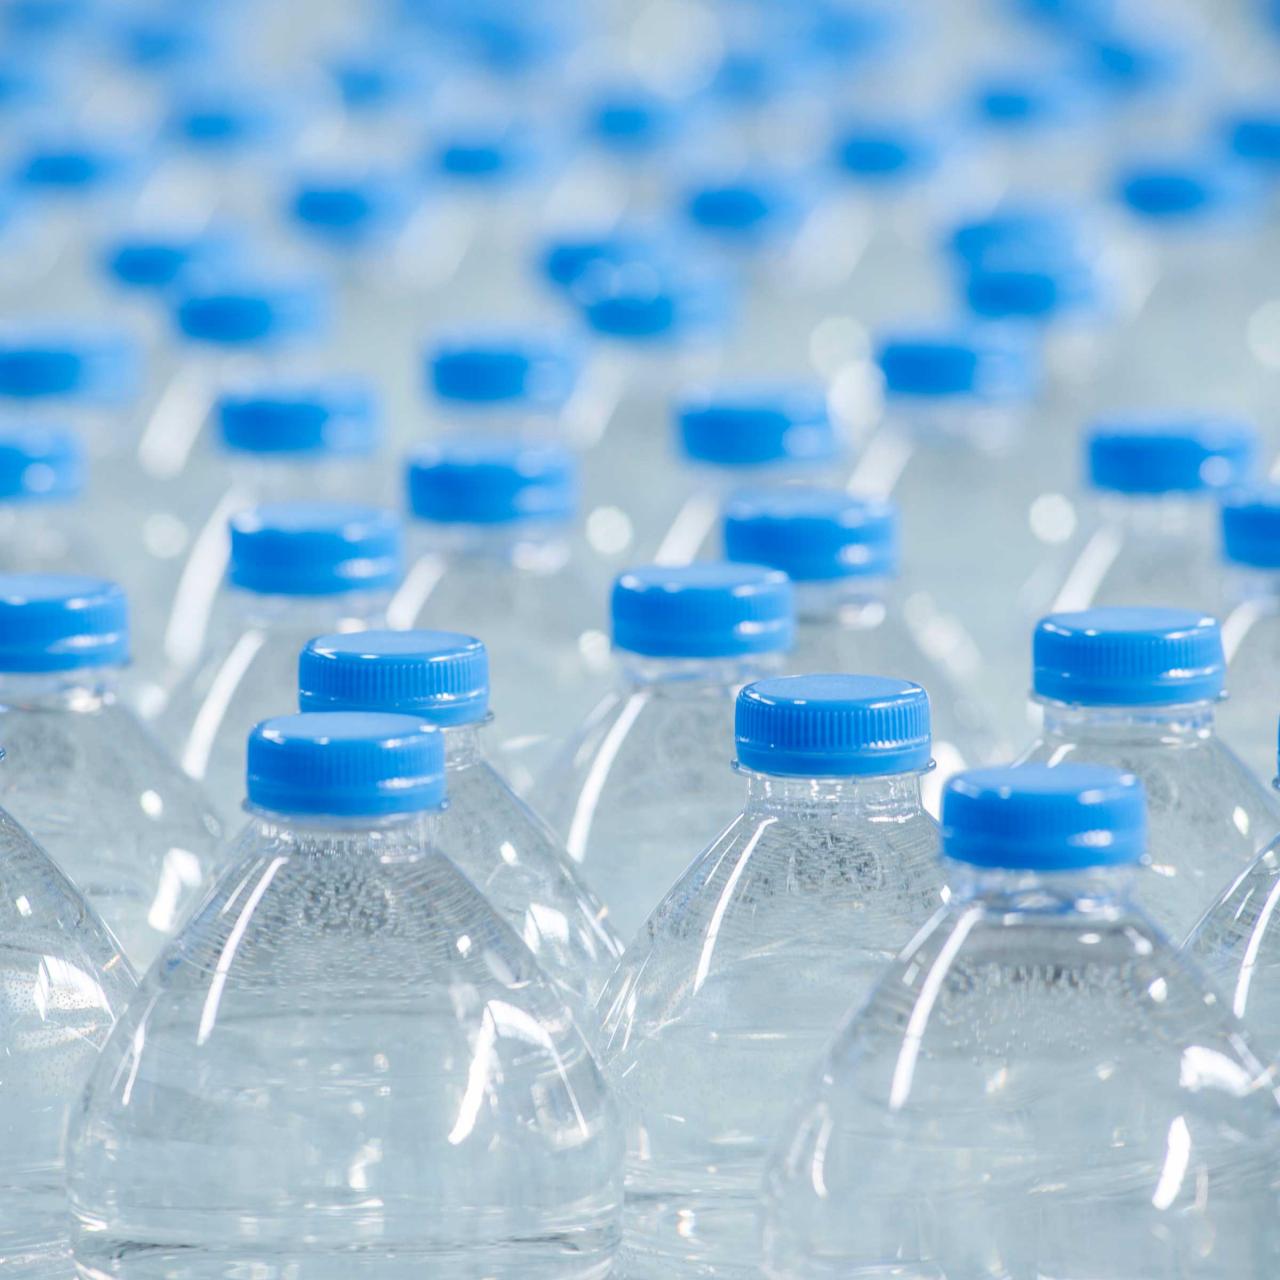 Bottled Water: You Could Be Drinking Tiny Bits of Plastic